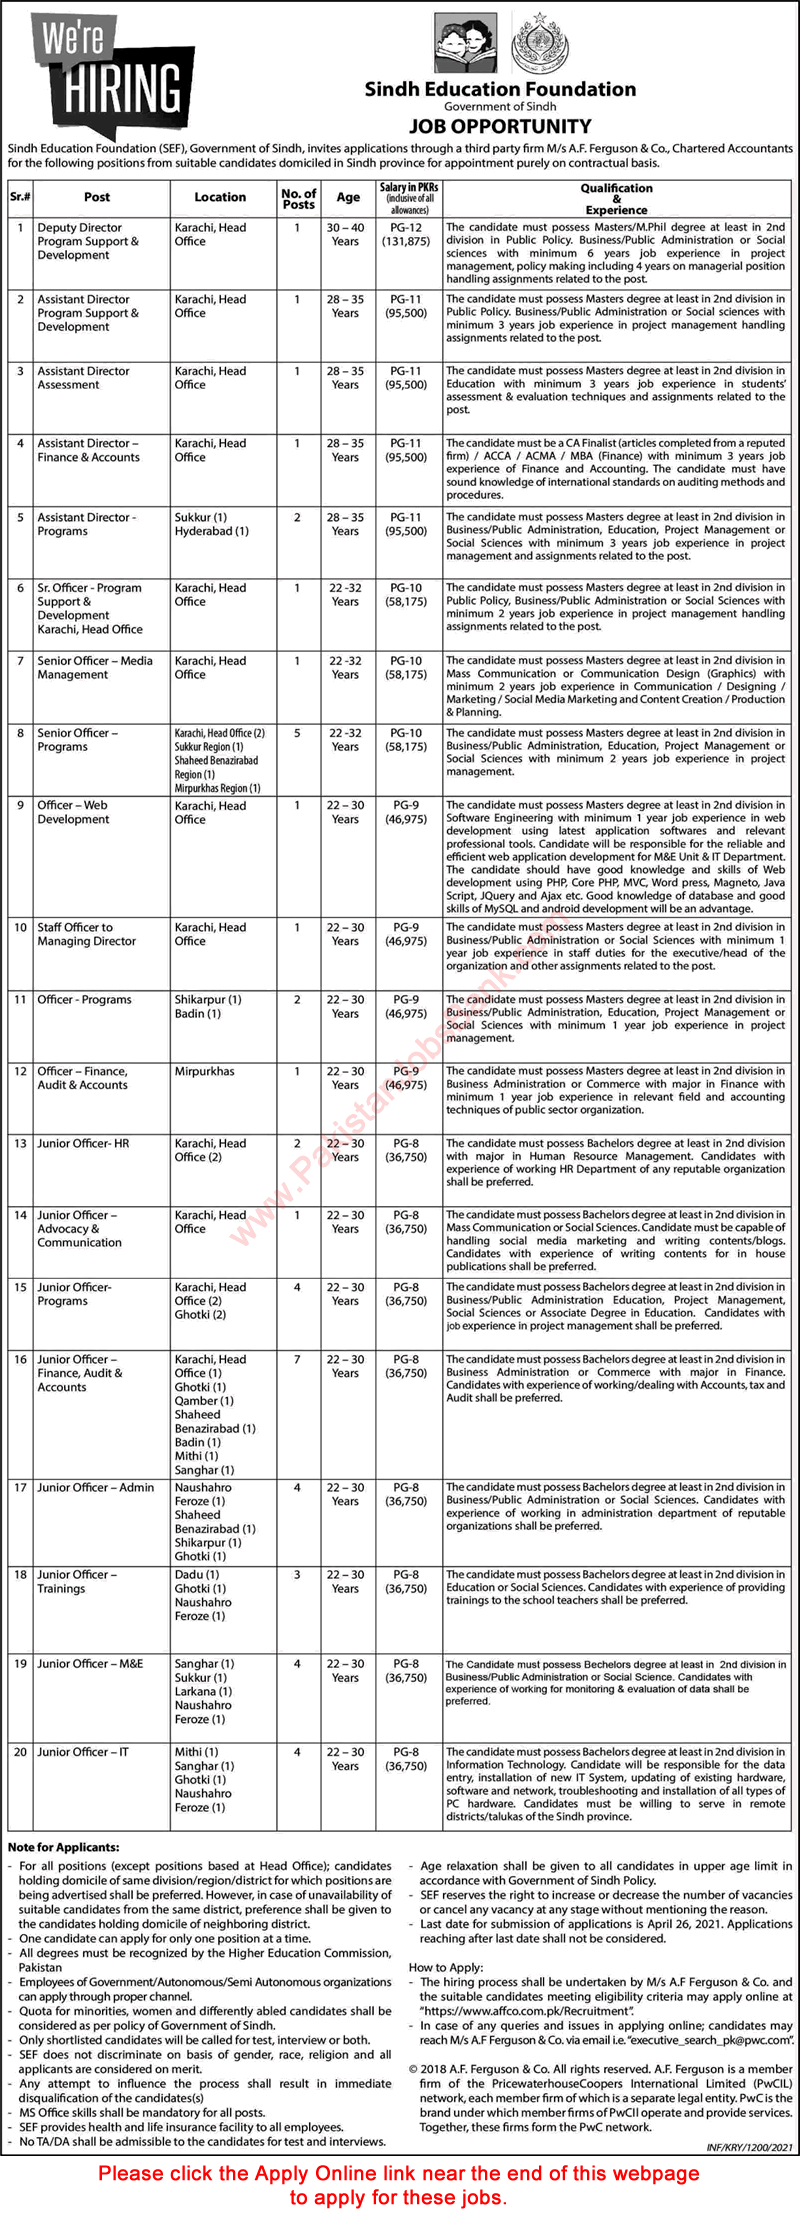 Sindh Education Foundation Jobs 2021 April SEF Apply Online Junior Officers & Others Latest